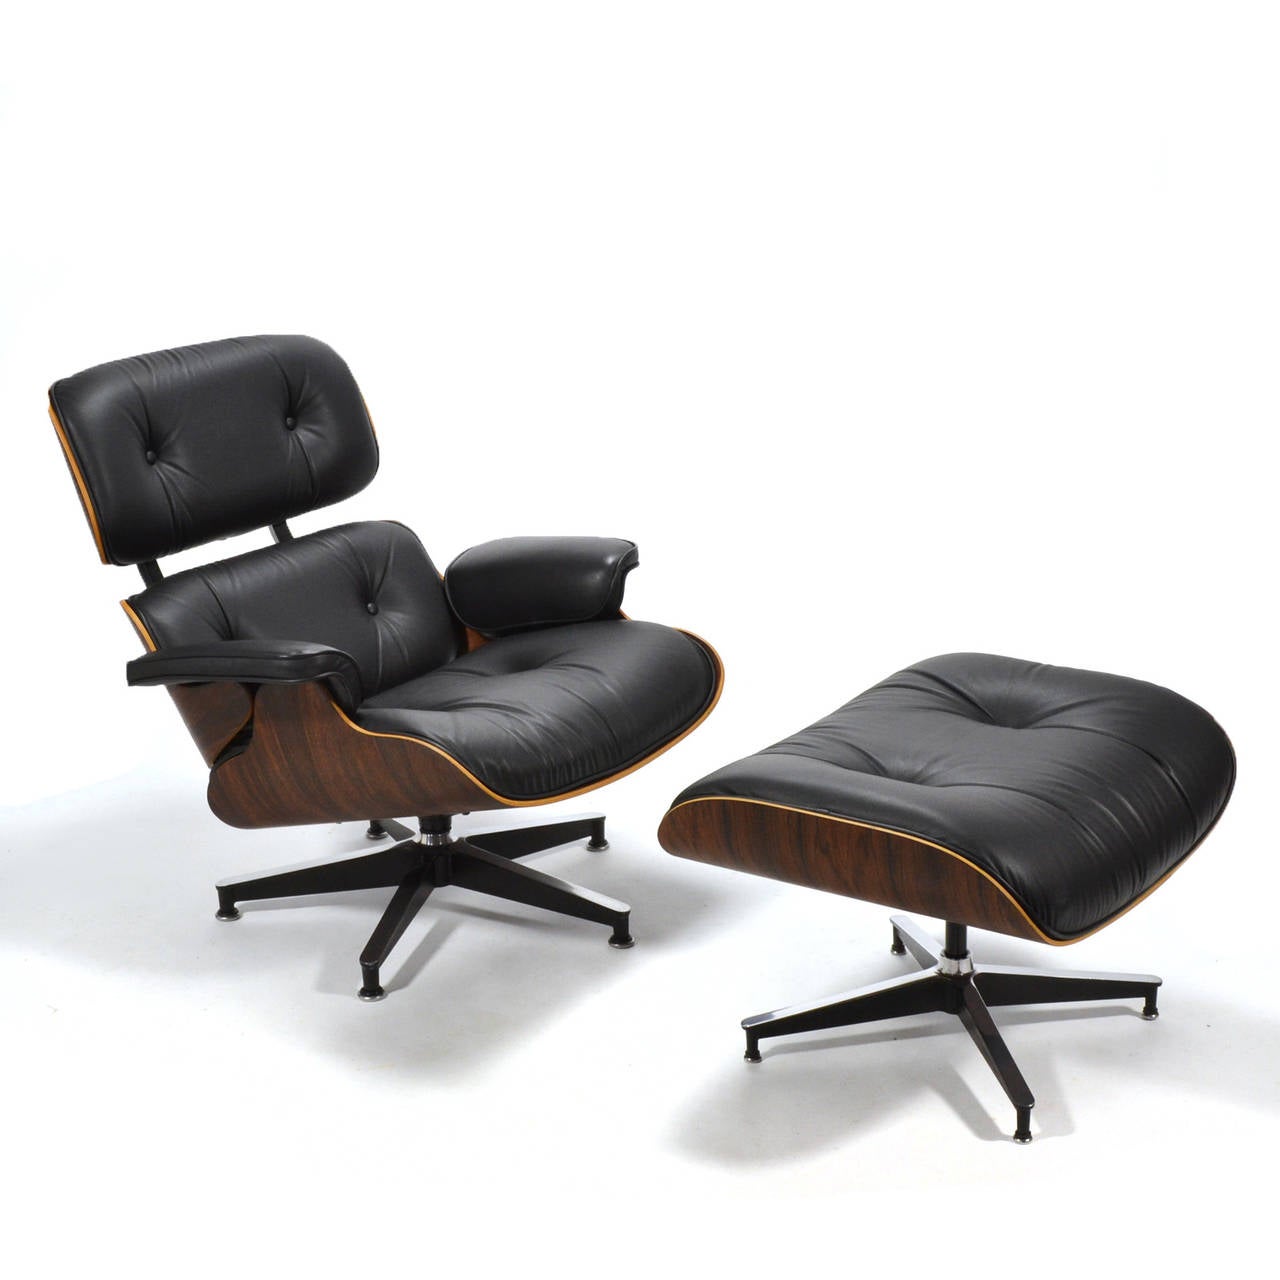 A pristine example of the iconic 670 lounge chair and 671 ottoman by Charles and Ray Eames. This vintage set has been fully restored and upholstered with top quality Edleman leather. The figuring of the rich rosewood on the shells is particularly